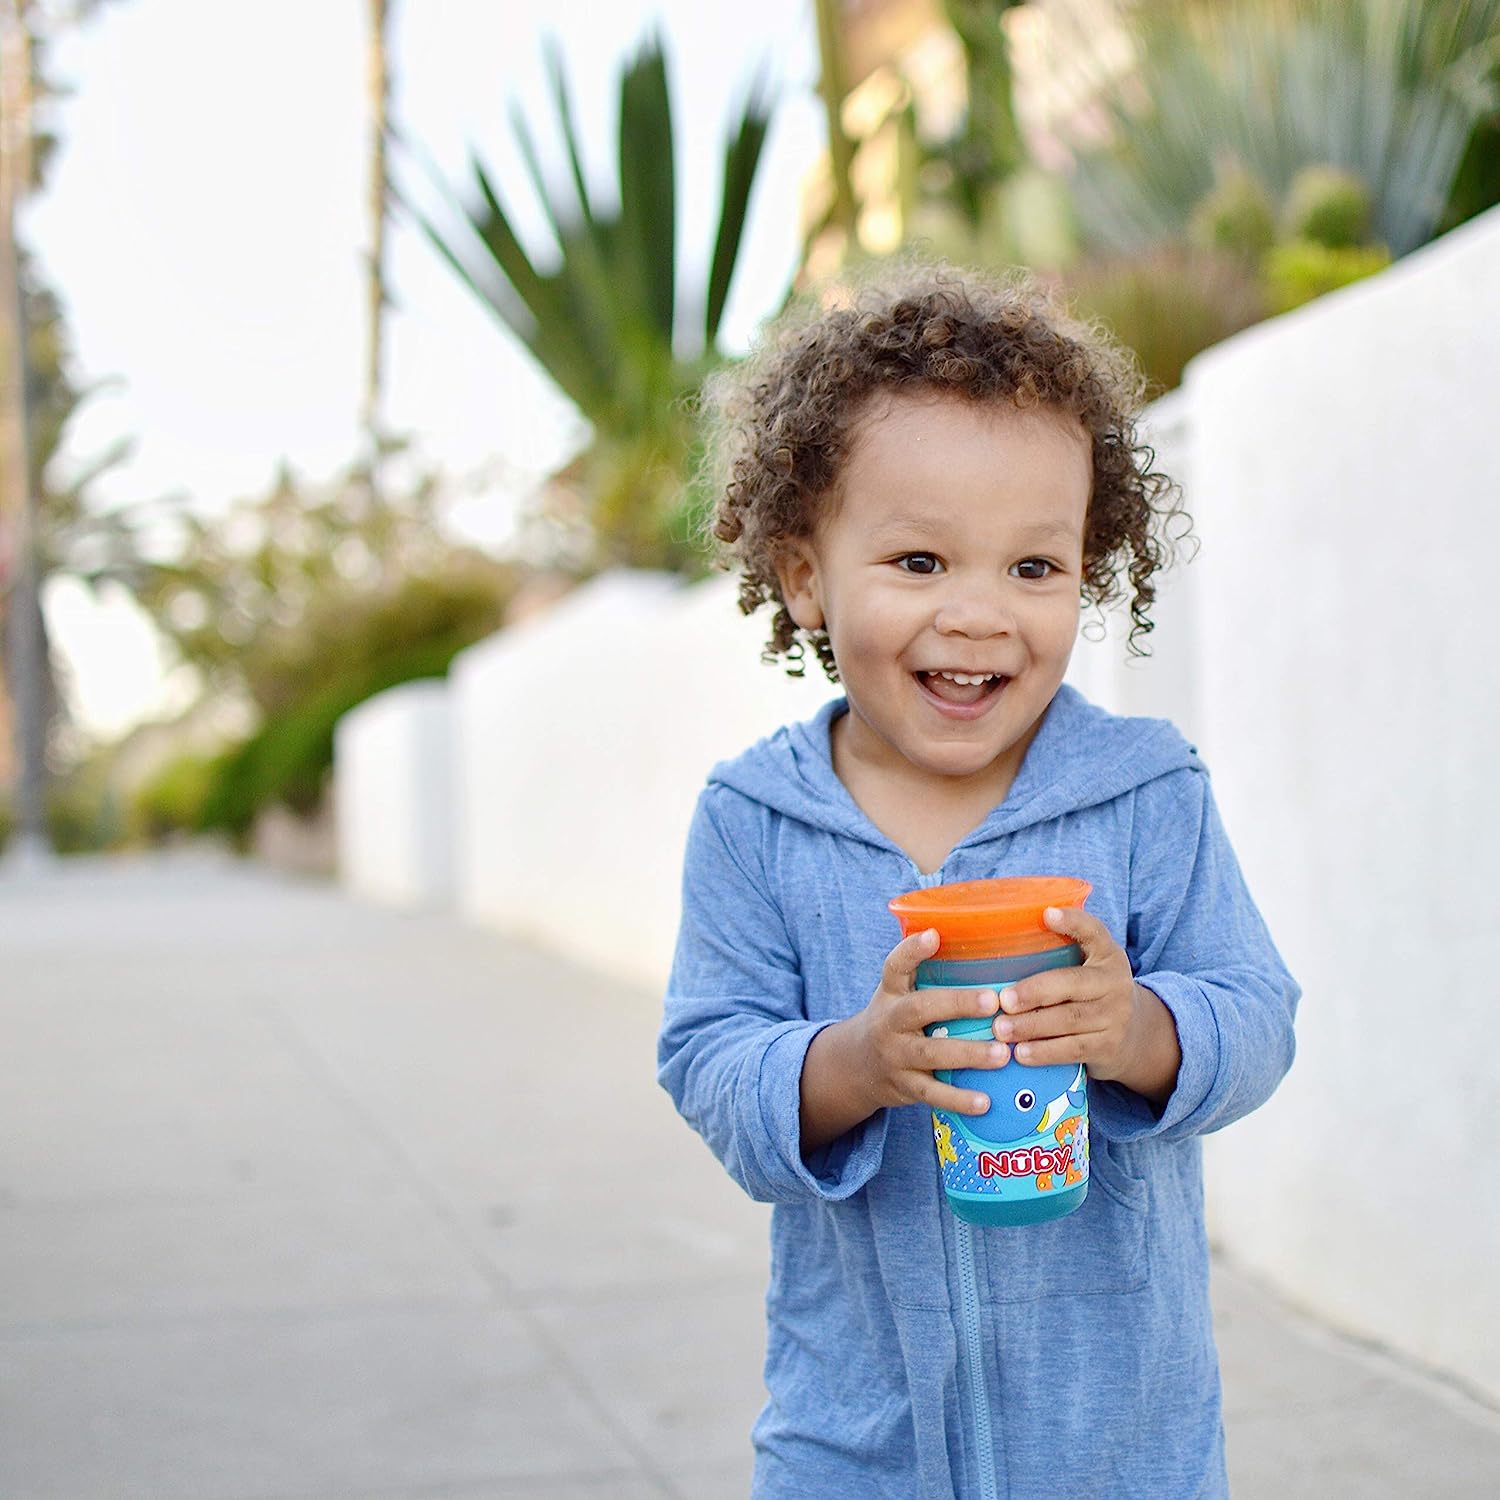 A smiling toddler standing on the sidewalk holding an orange and blue Nuby cup with a whale graphic on the outside.